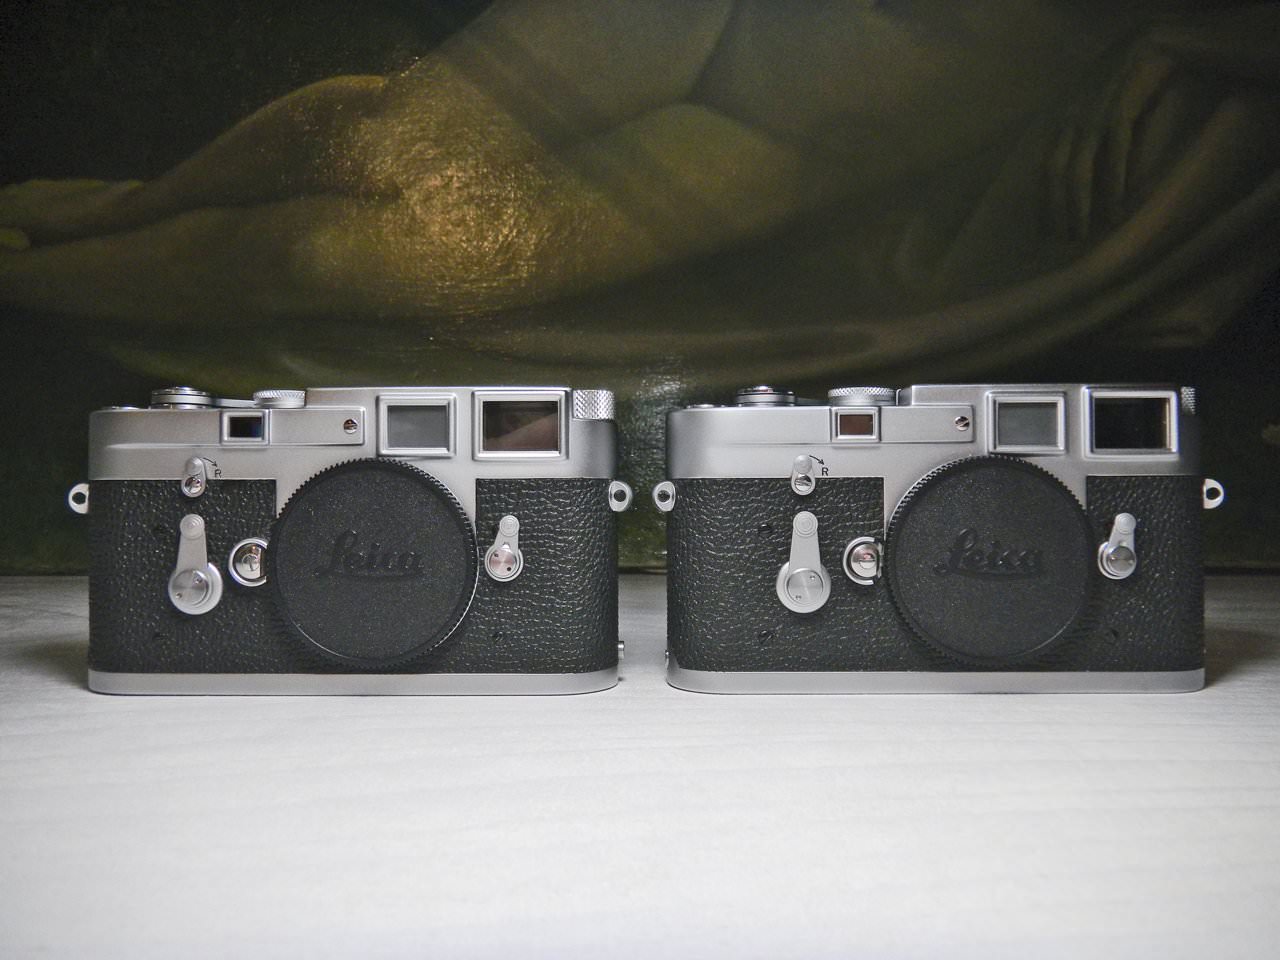 Seeing Double: The Curious Case of My Identical Twin Leica M3s